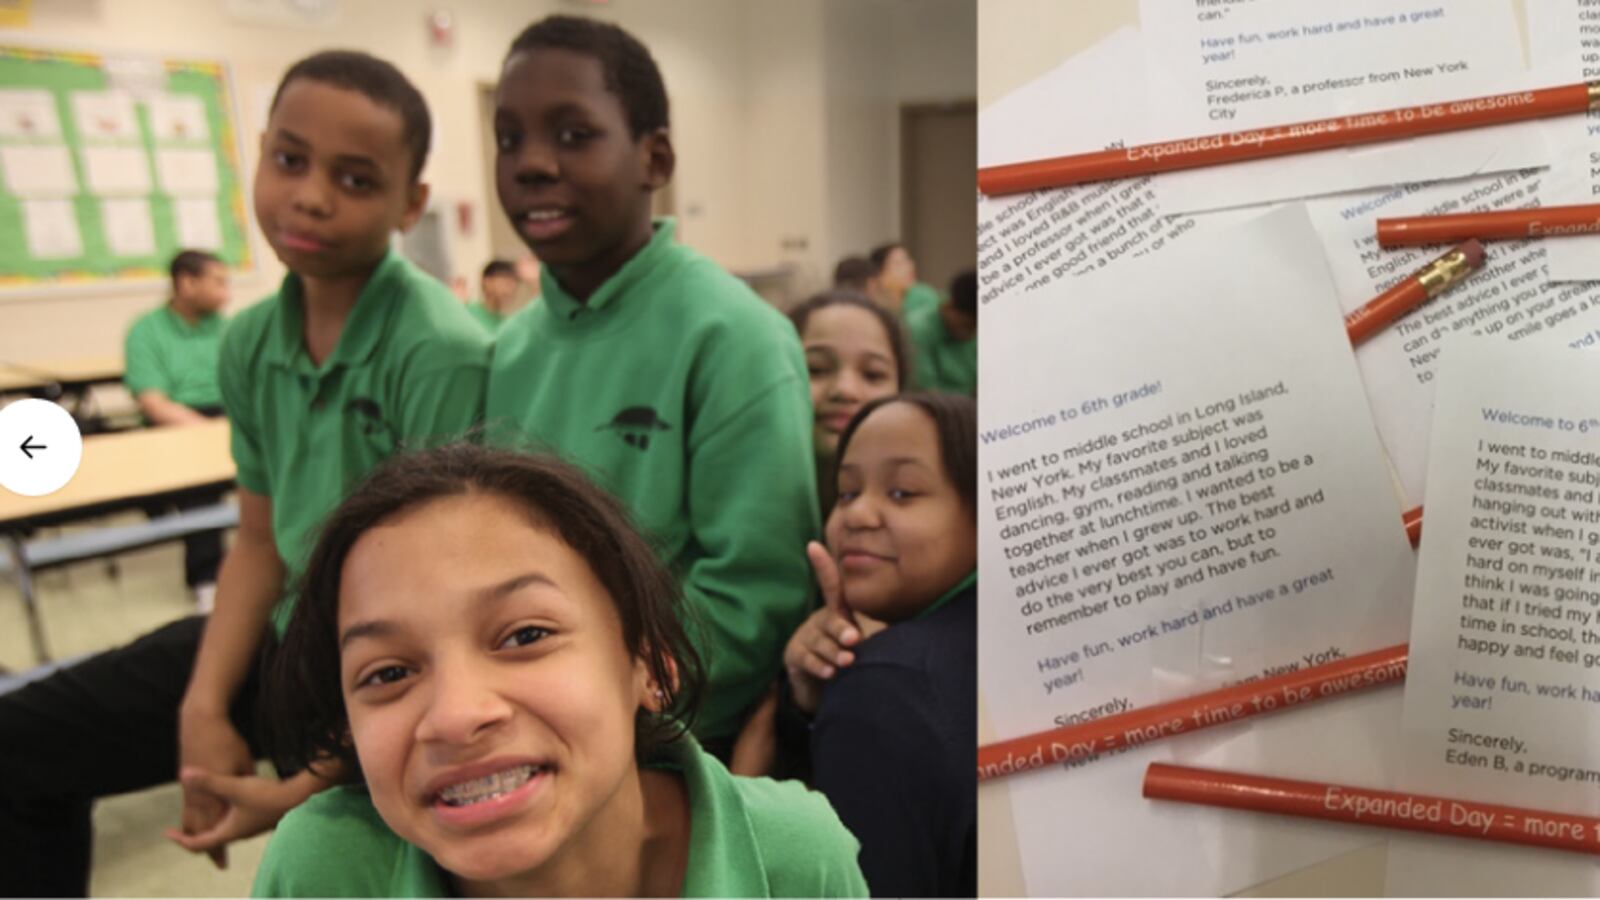 Hundreds of letters made their way to sixth graders last year.